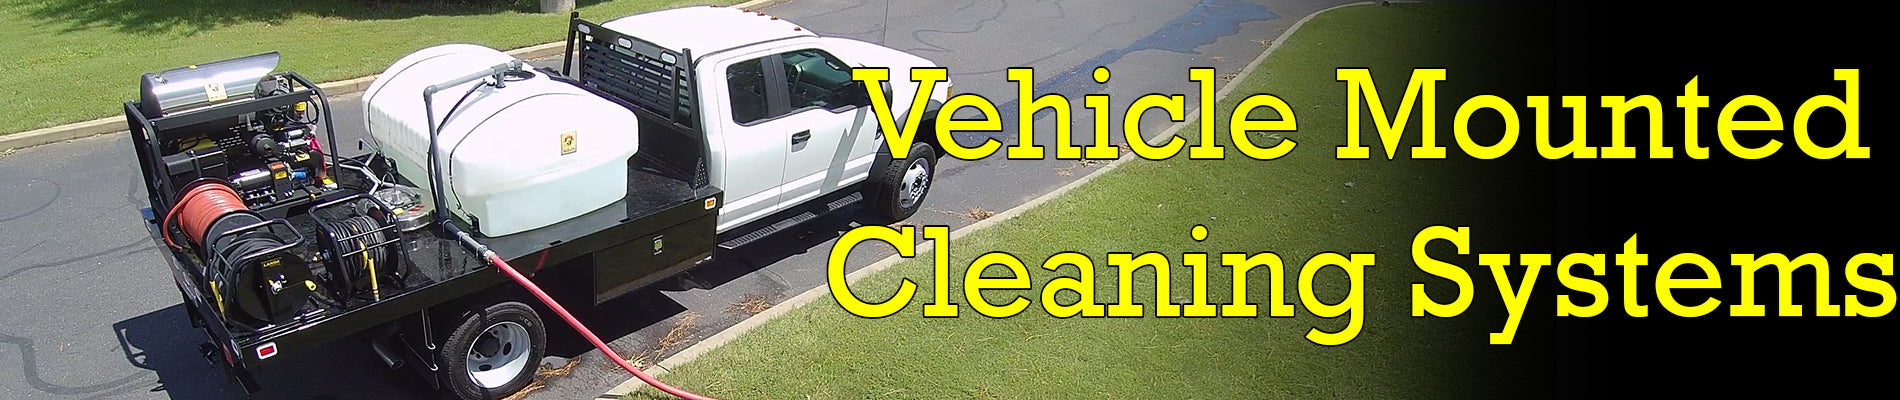 Vehicle Mounted Cleaning Systems